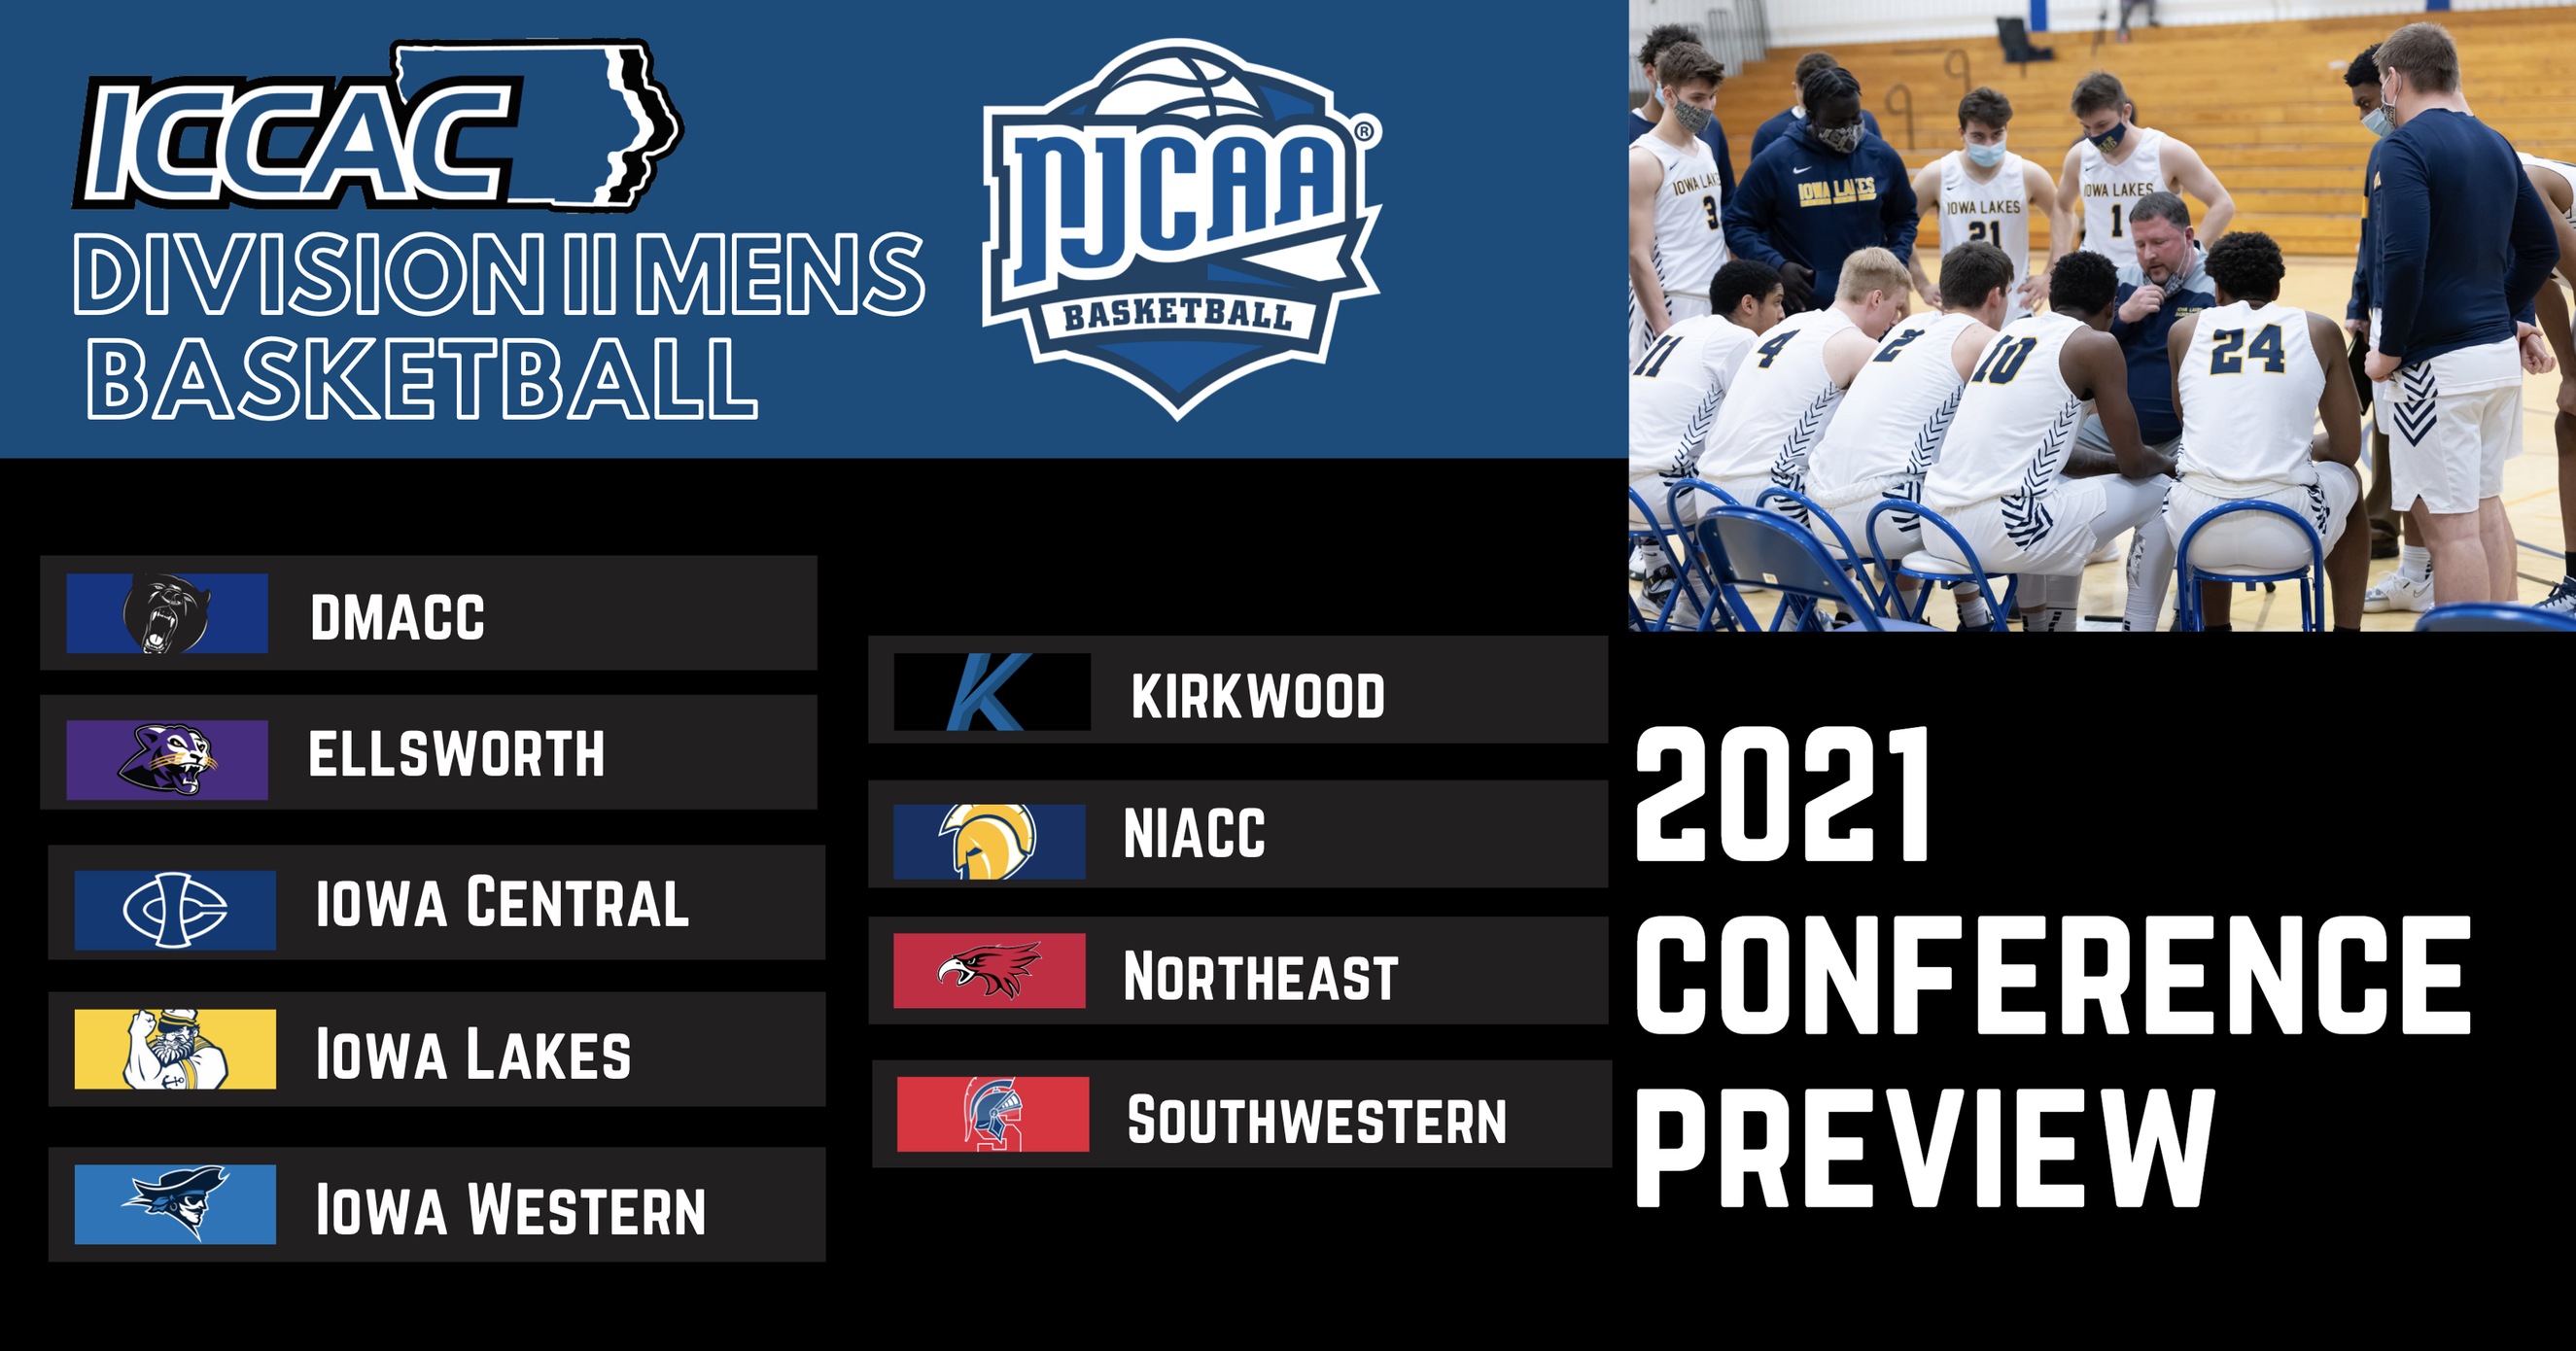 ICCAC WINTER PREVIEW | DIVISION II MEN'S BASKETBALL